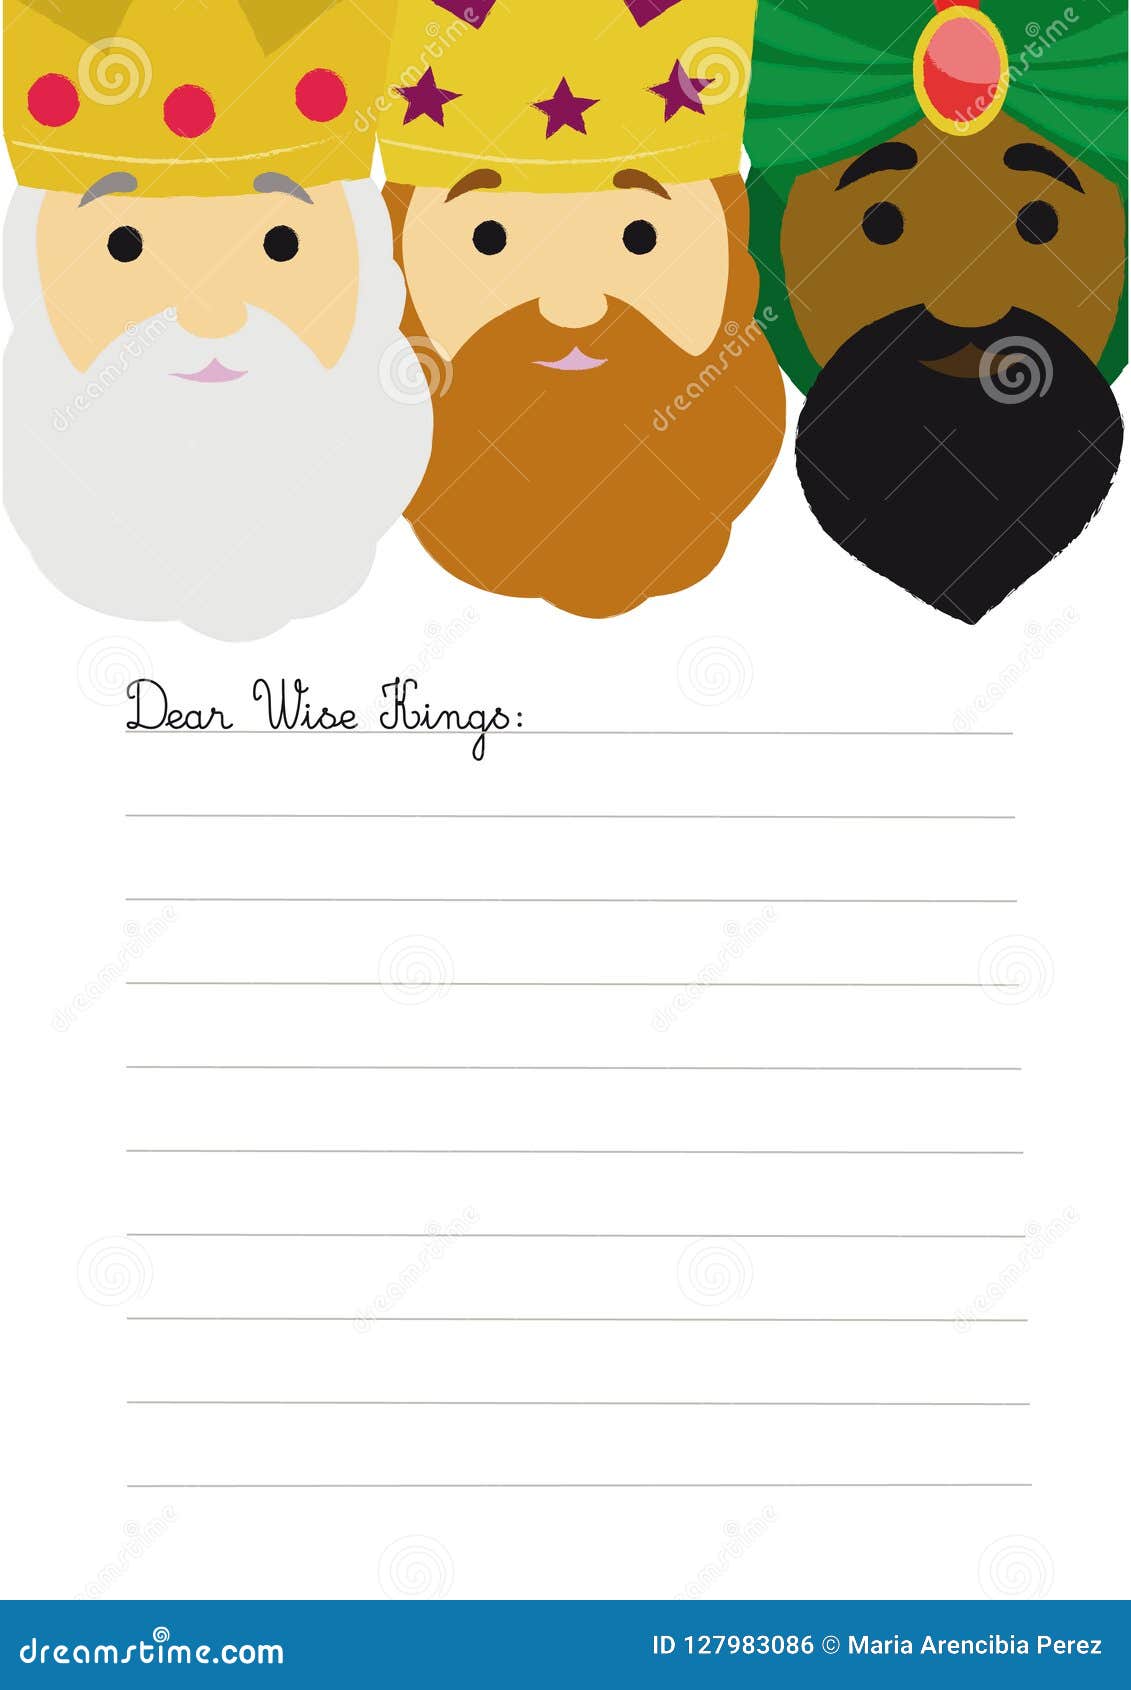 Cute Letter Template from thumbs.dreamstime.com